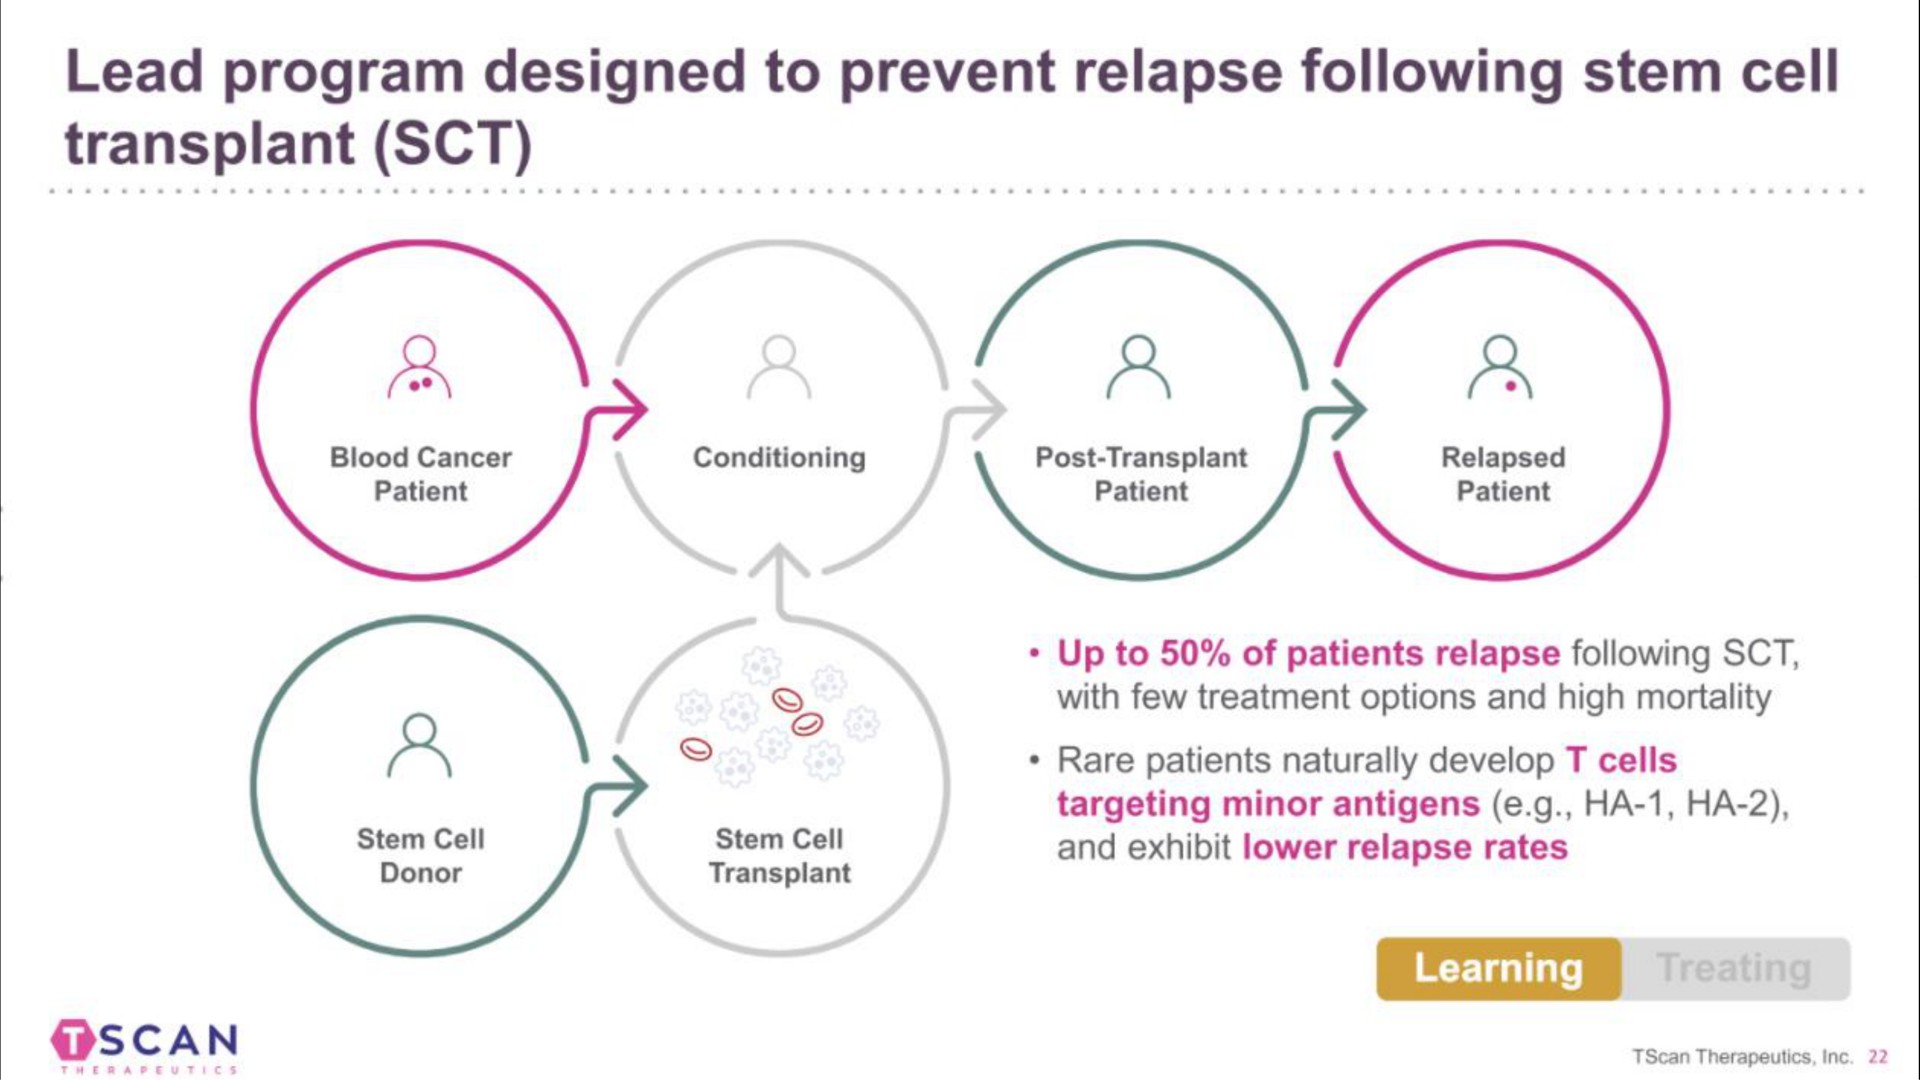 lead program designed to prevent relapse following stem cell transplant a a a | TScan Therapeutics